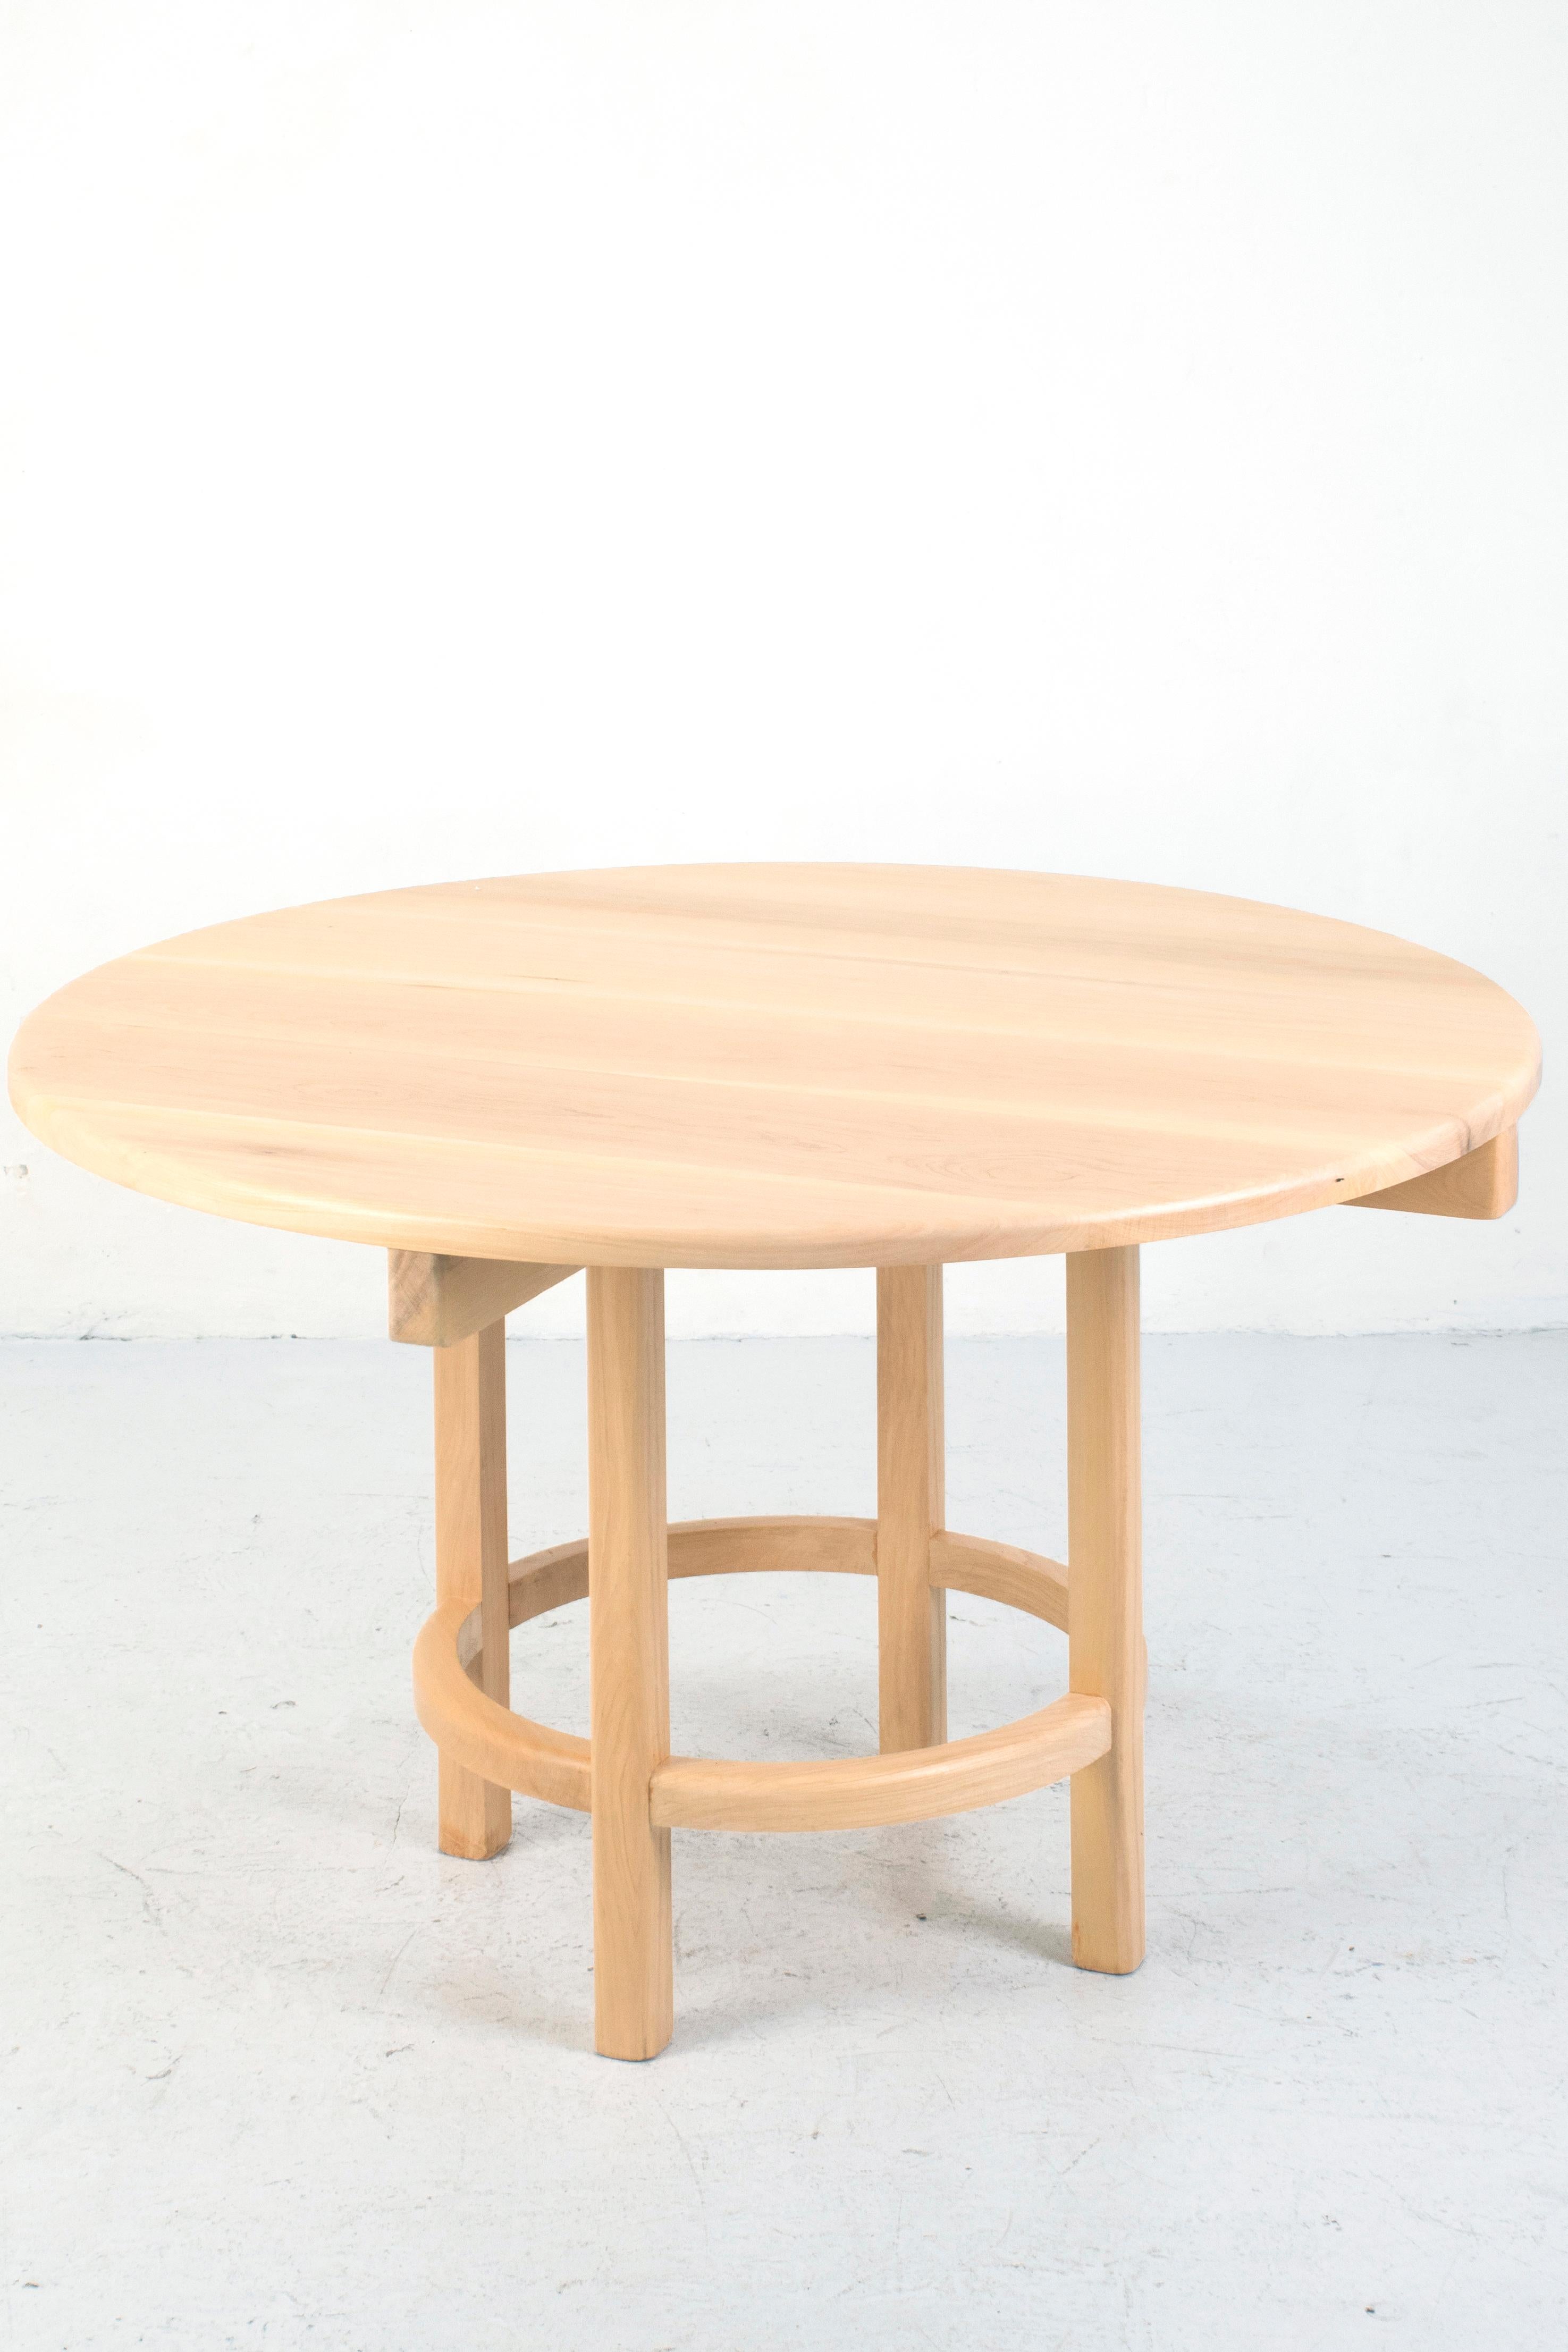 Orno Round dining table by Ries
Dimensions: D120 x H73 cm 
Materials: Hardwood
Transparent matte lacquer, color matte lacquer (finishings)

Ries is a design studio based in Buenos Aires, Argentina, focused on product and conemporary furniture